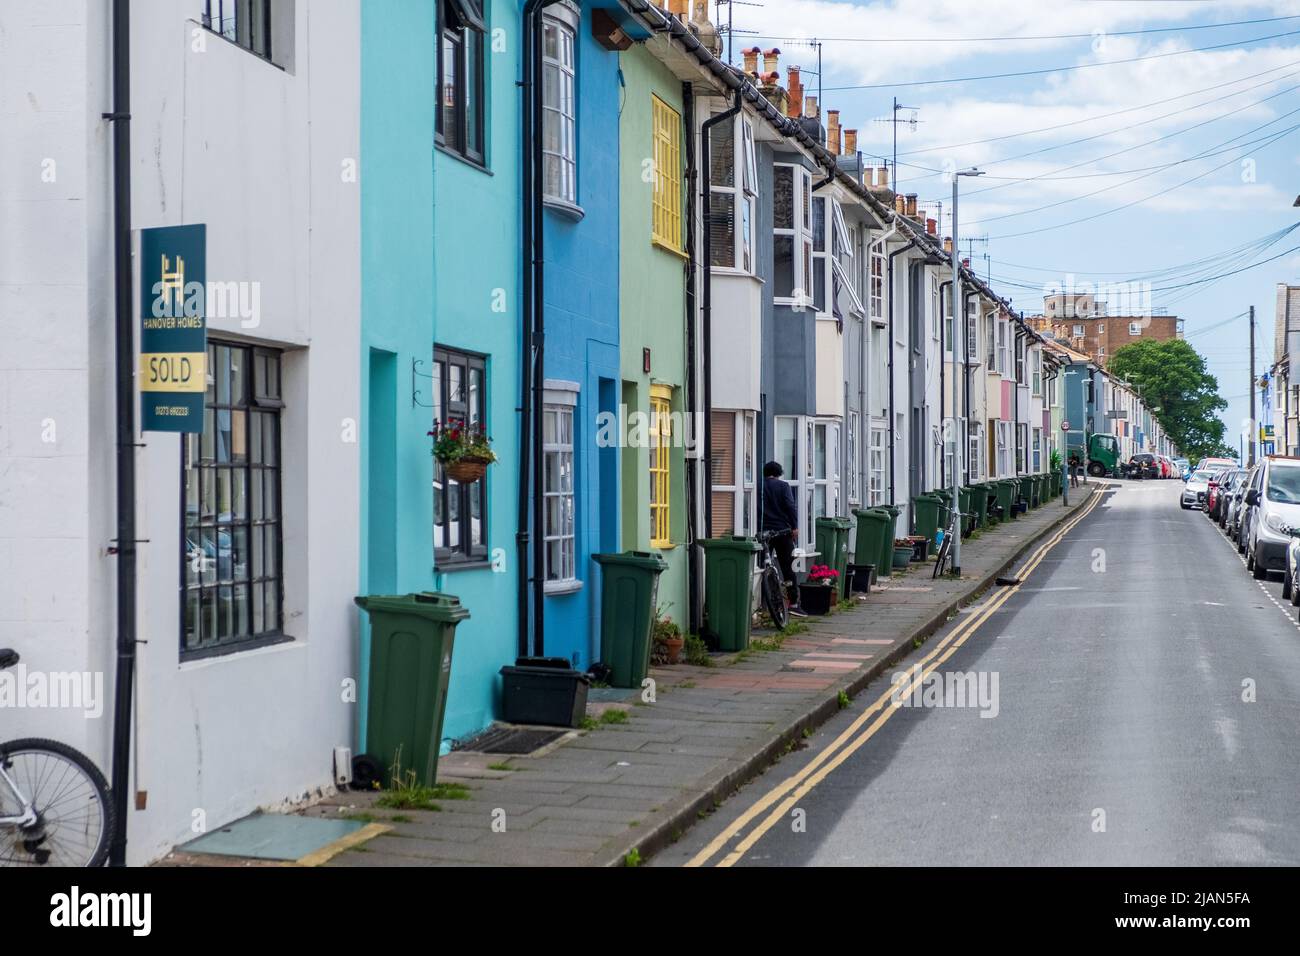 Terraced cottages typical of the Hanover neighbourhood on Washington Street in  Brighton Stock Photo